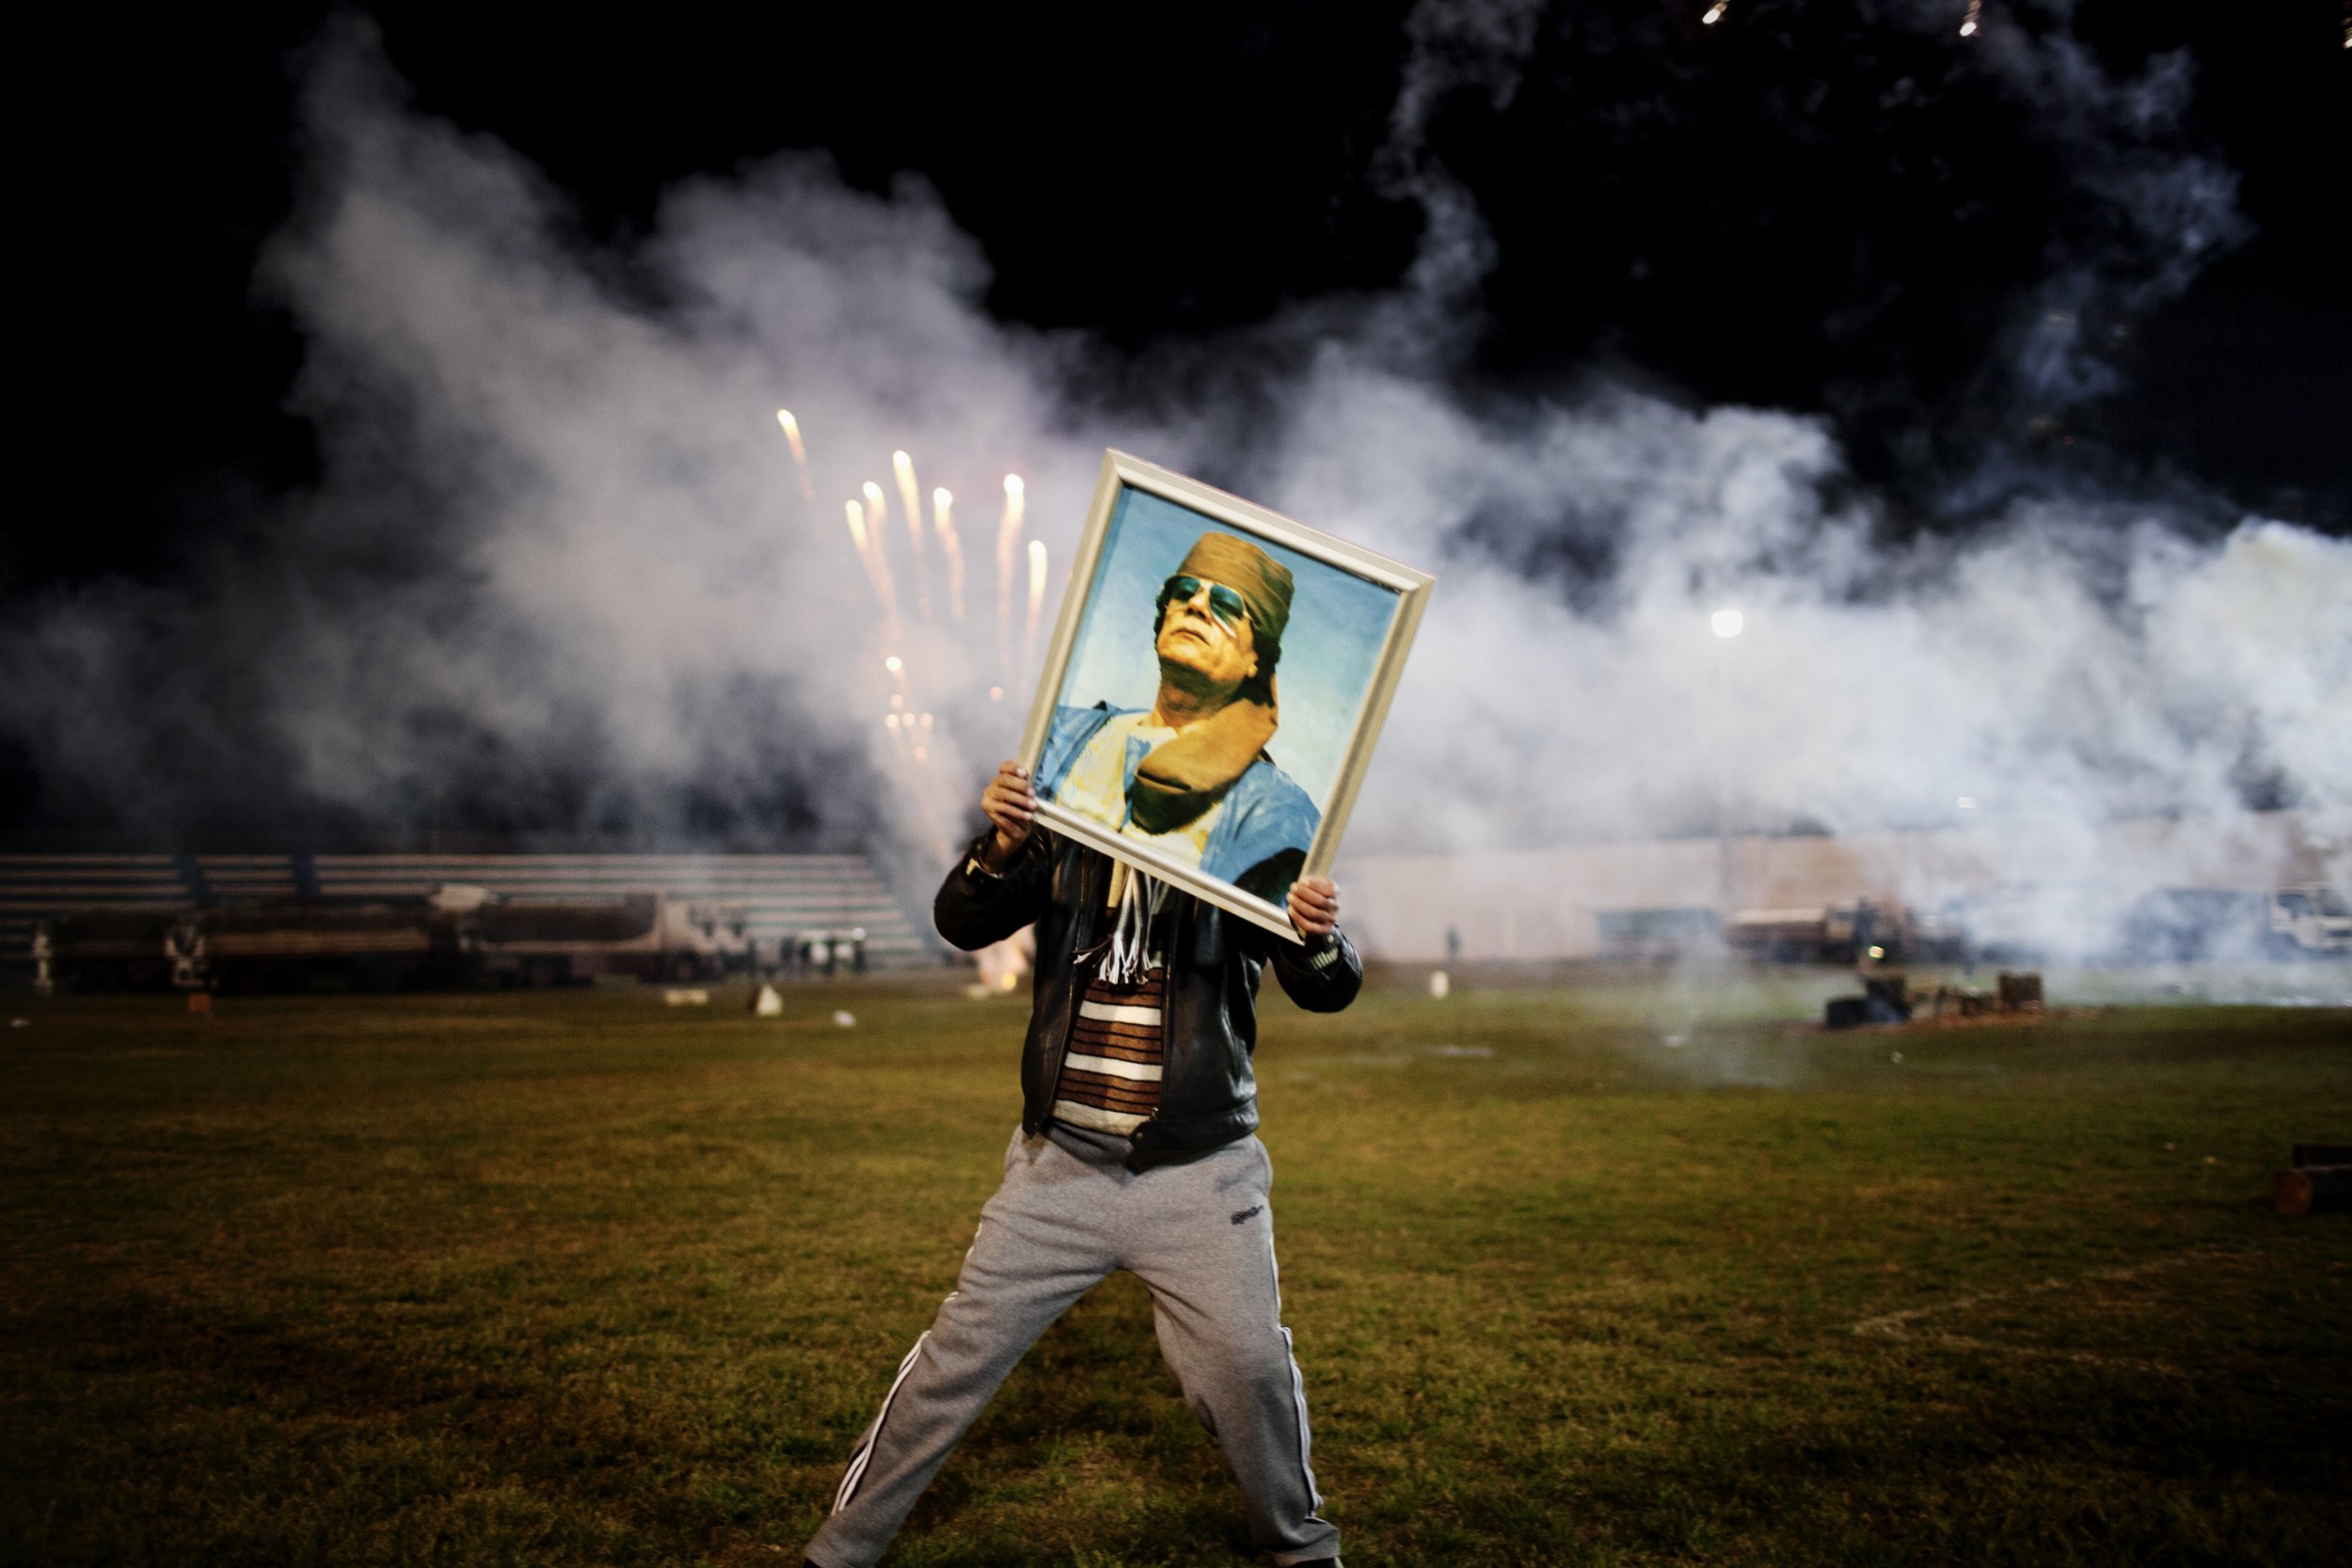 In Conversation: Photographer Moises Saman On His Journey Documenting the Arab Spring